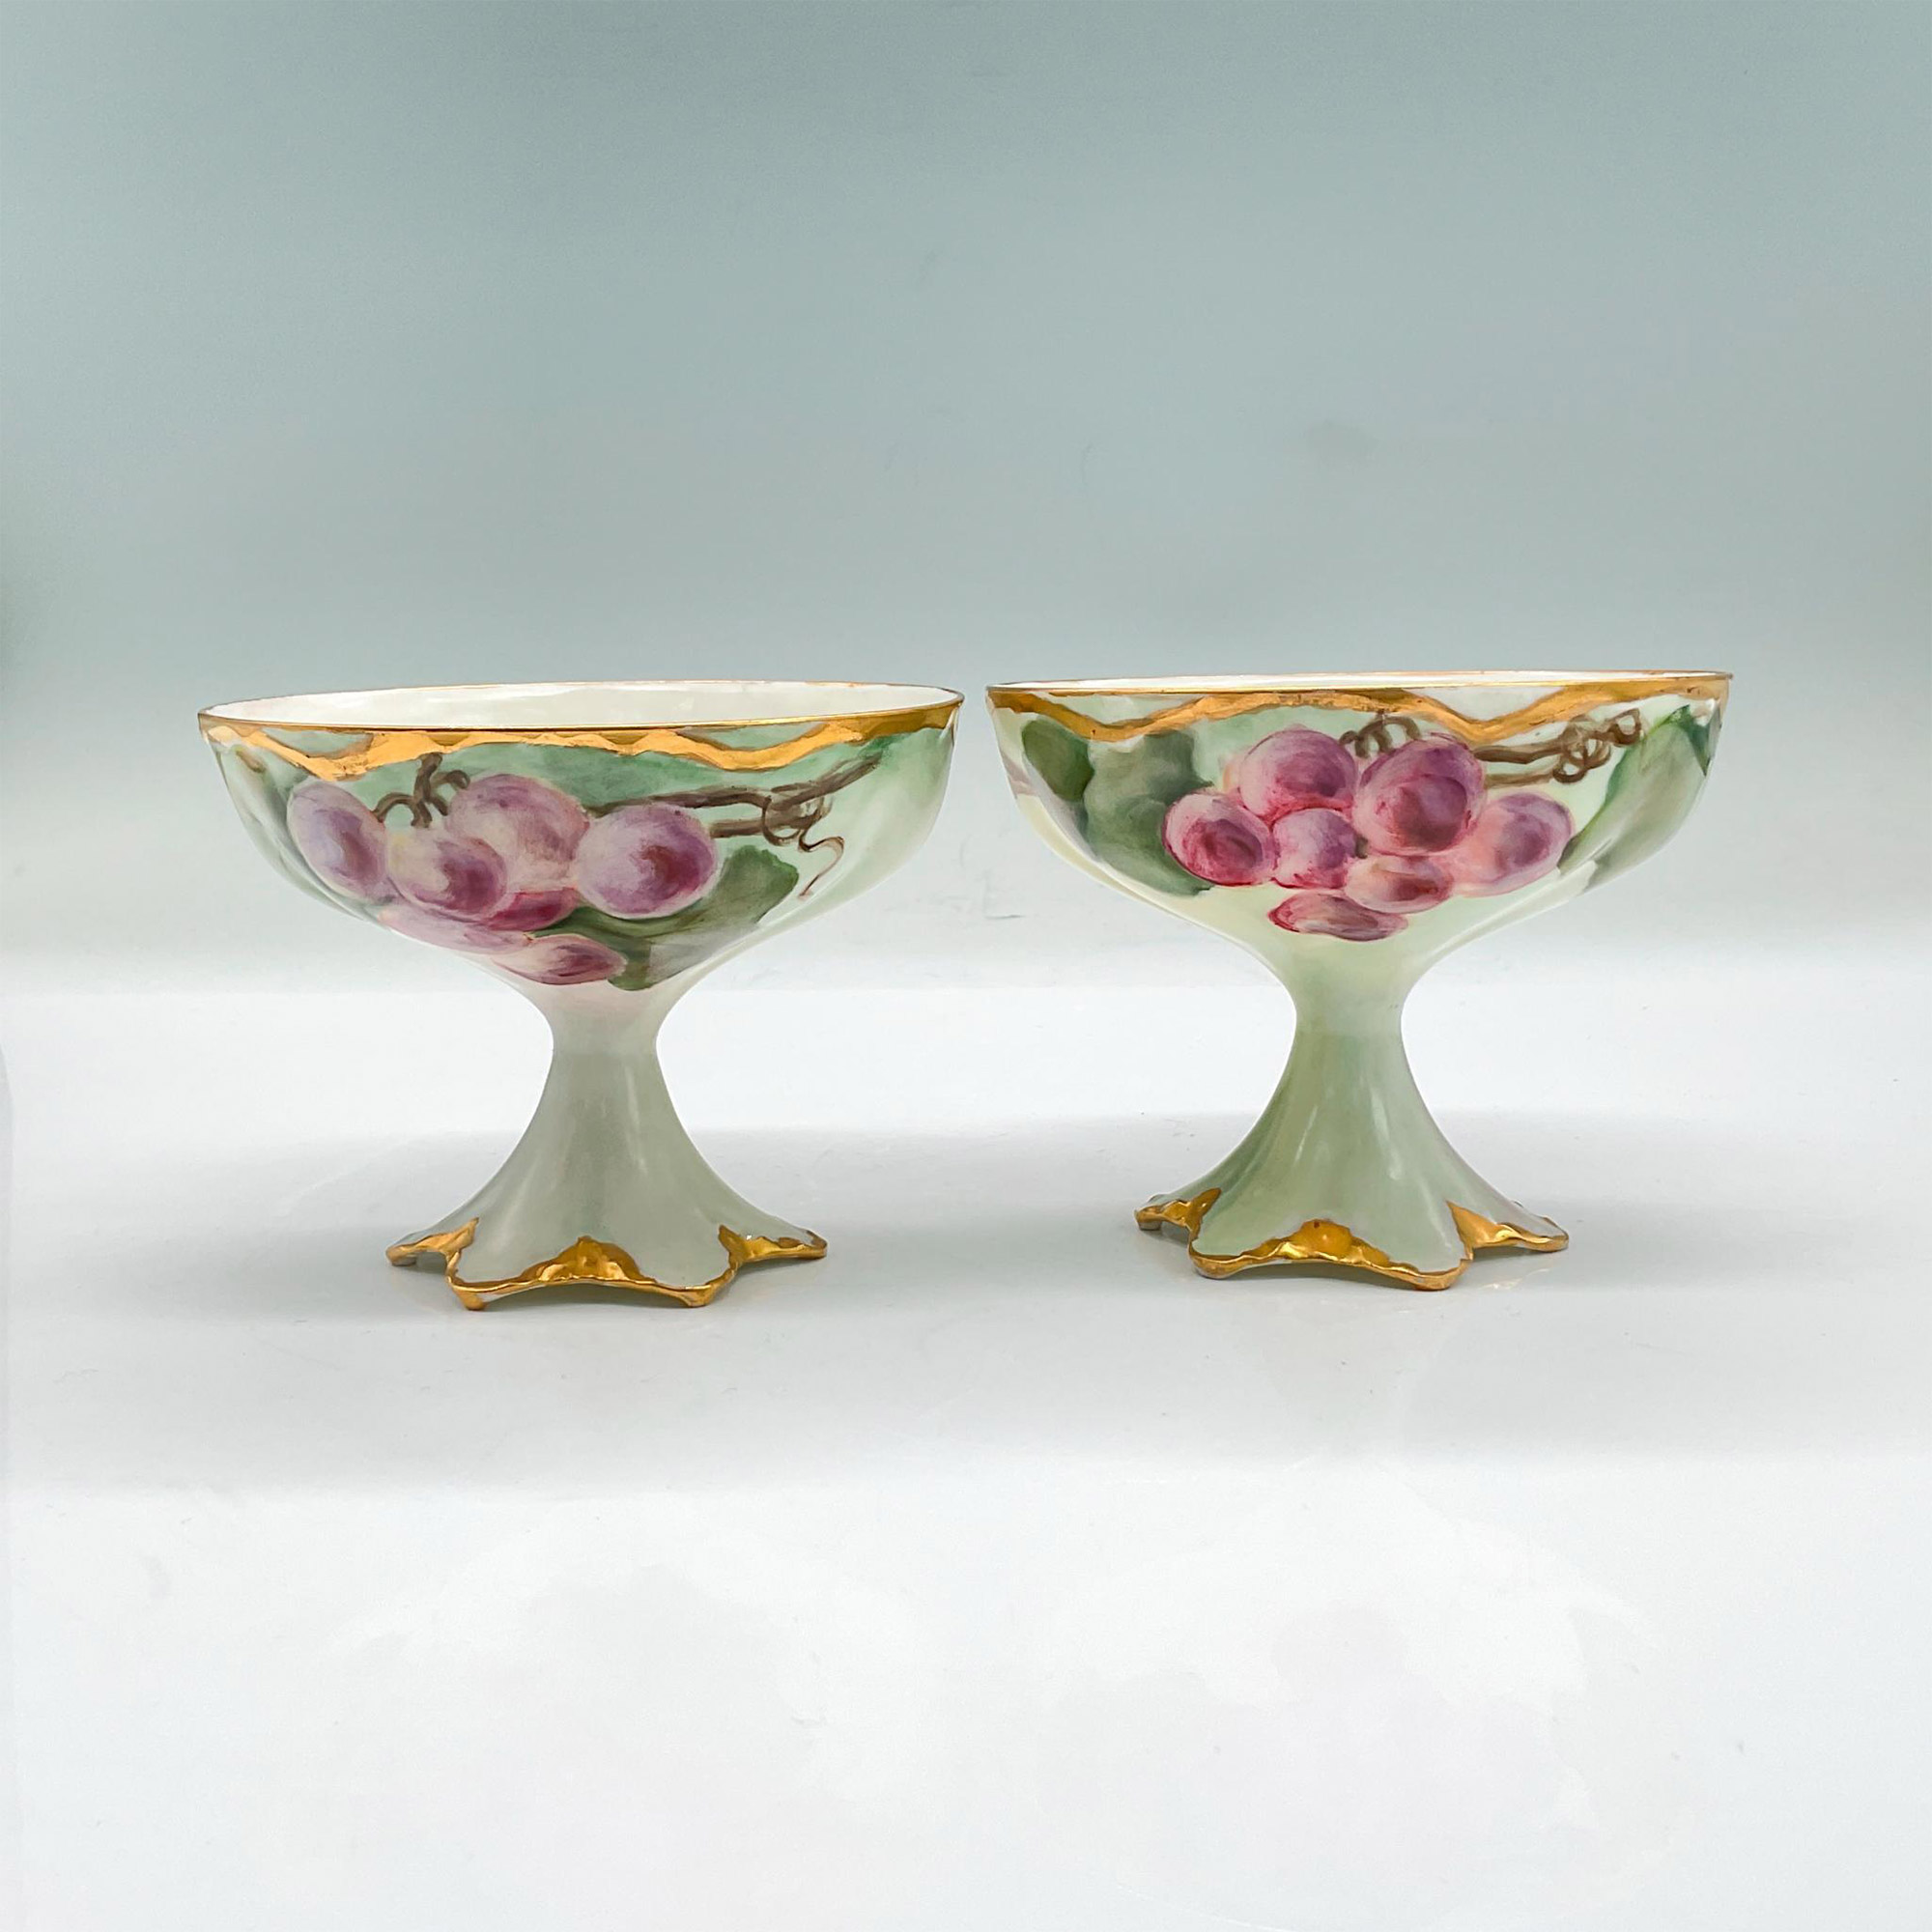 3pc W.G. & Co. Limoges Porcelain Pitcher + 2 Cups, Grapes - Image 4 of 7